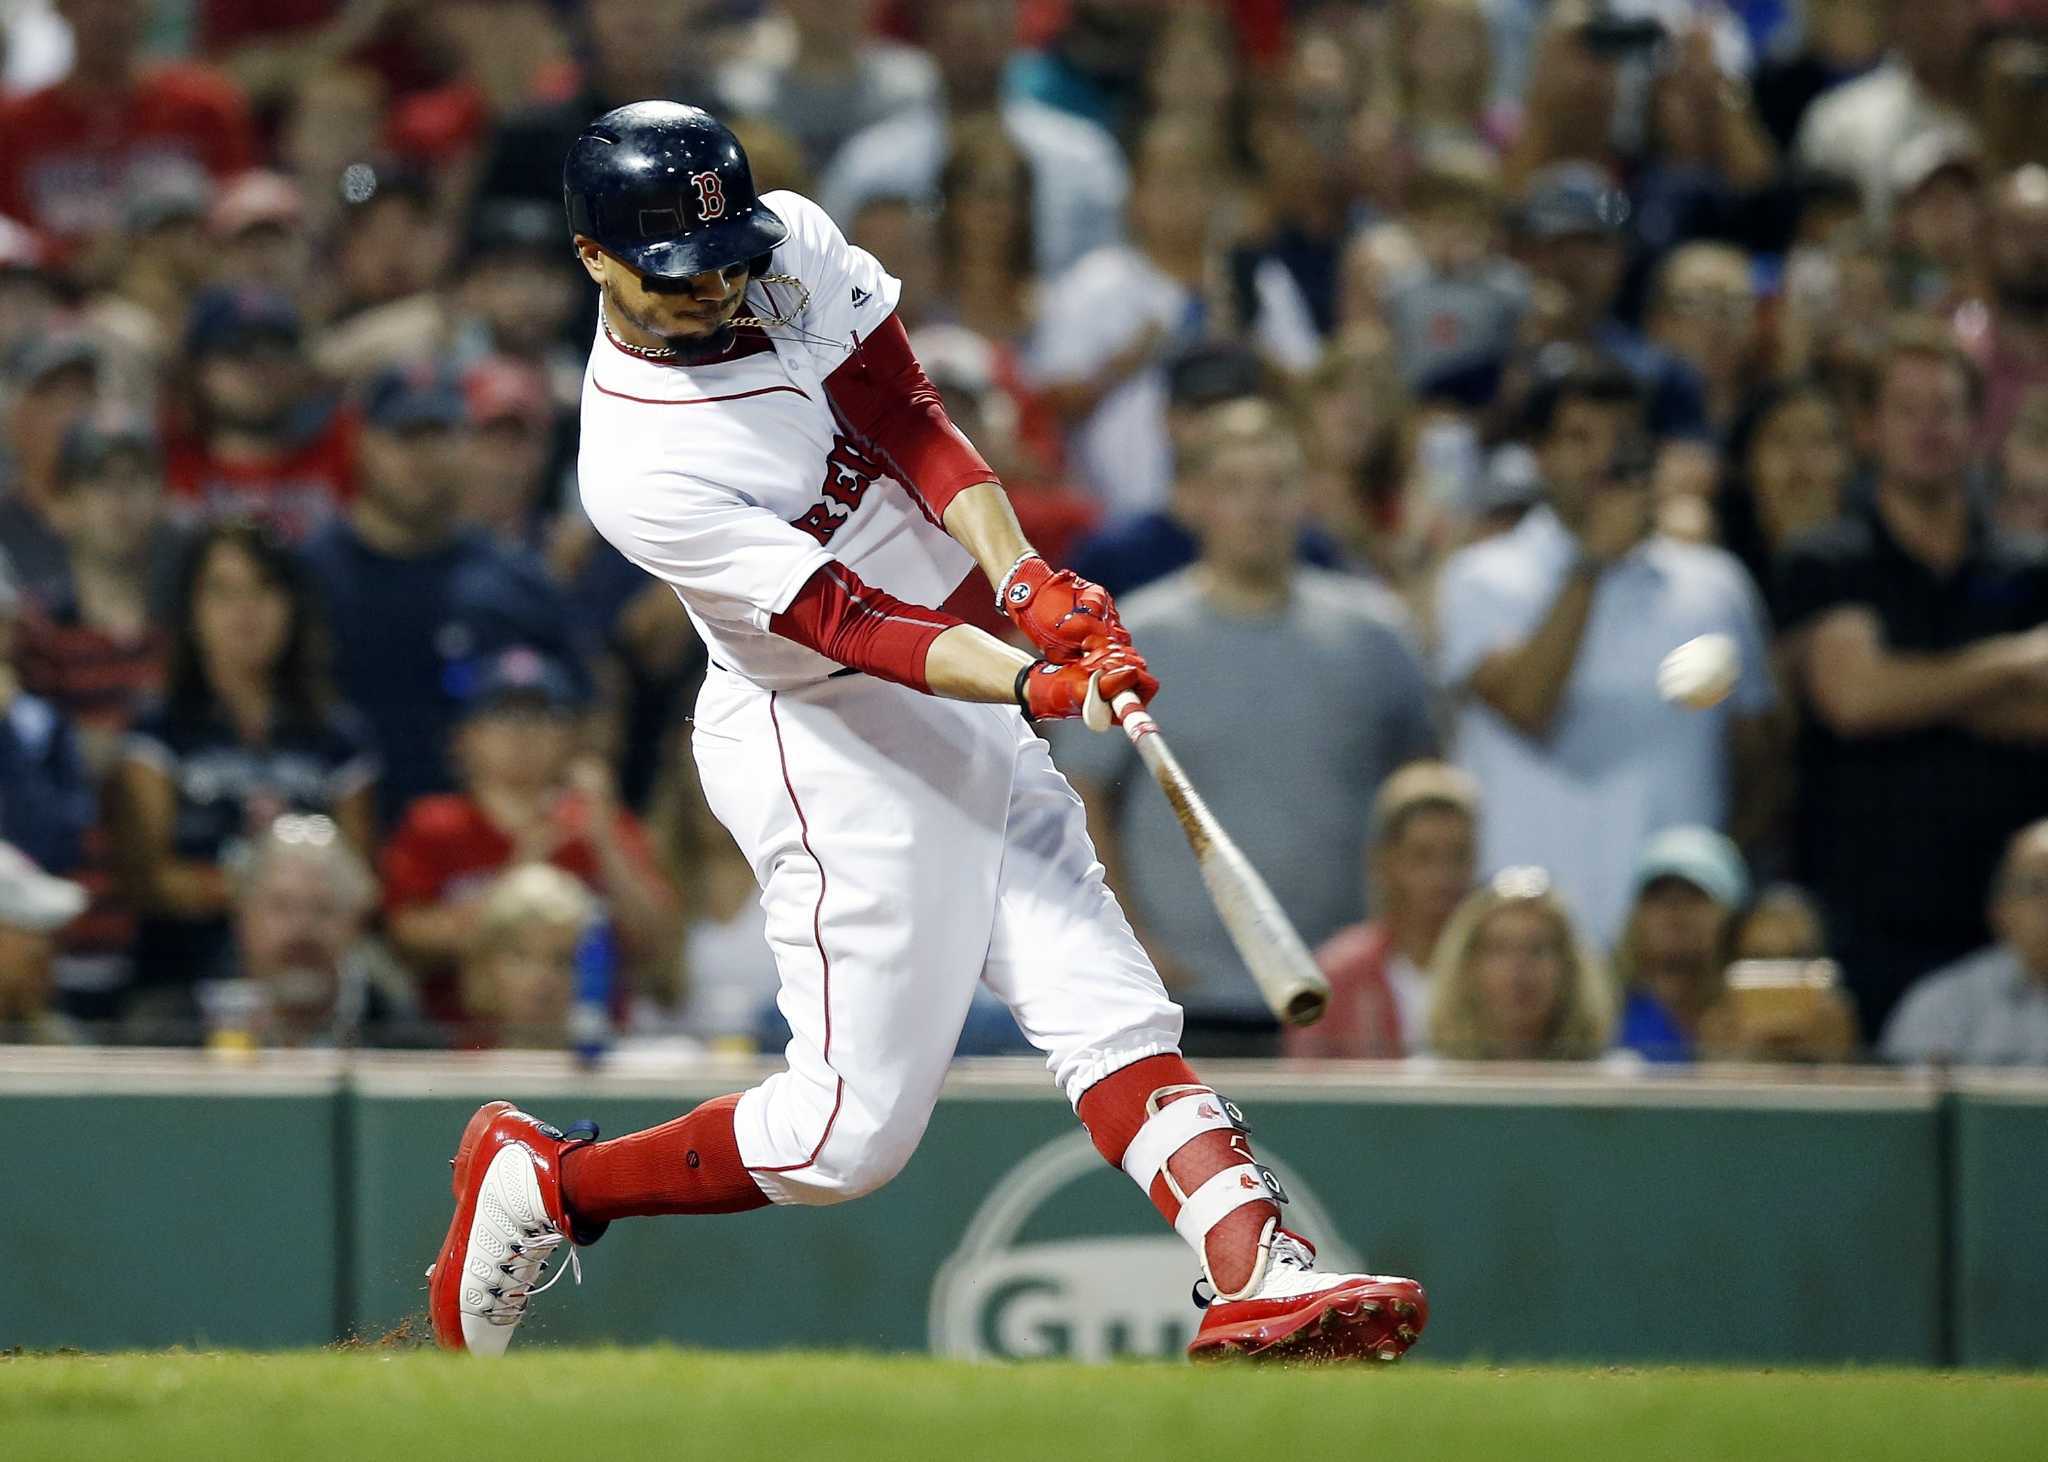 Mookie Betts Digs Deep Regarding His Time With the Boston Red Sox